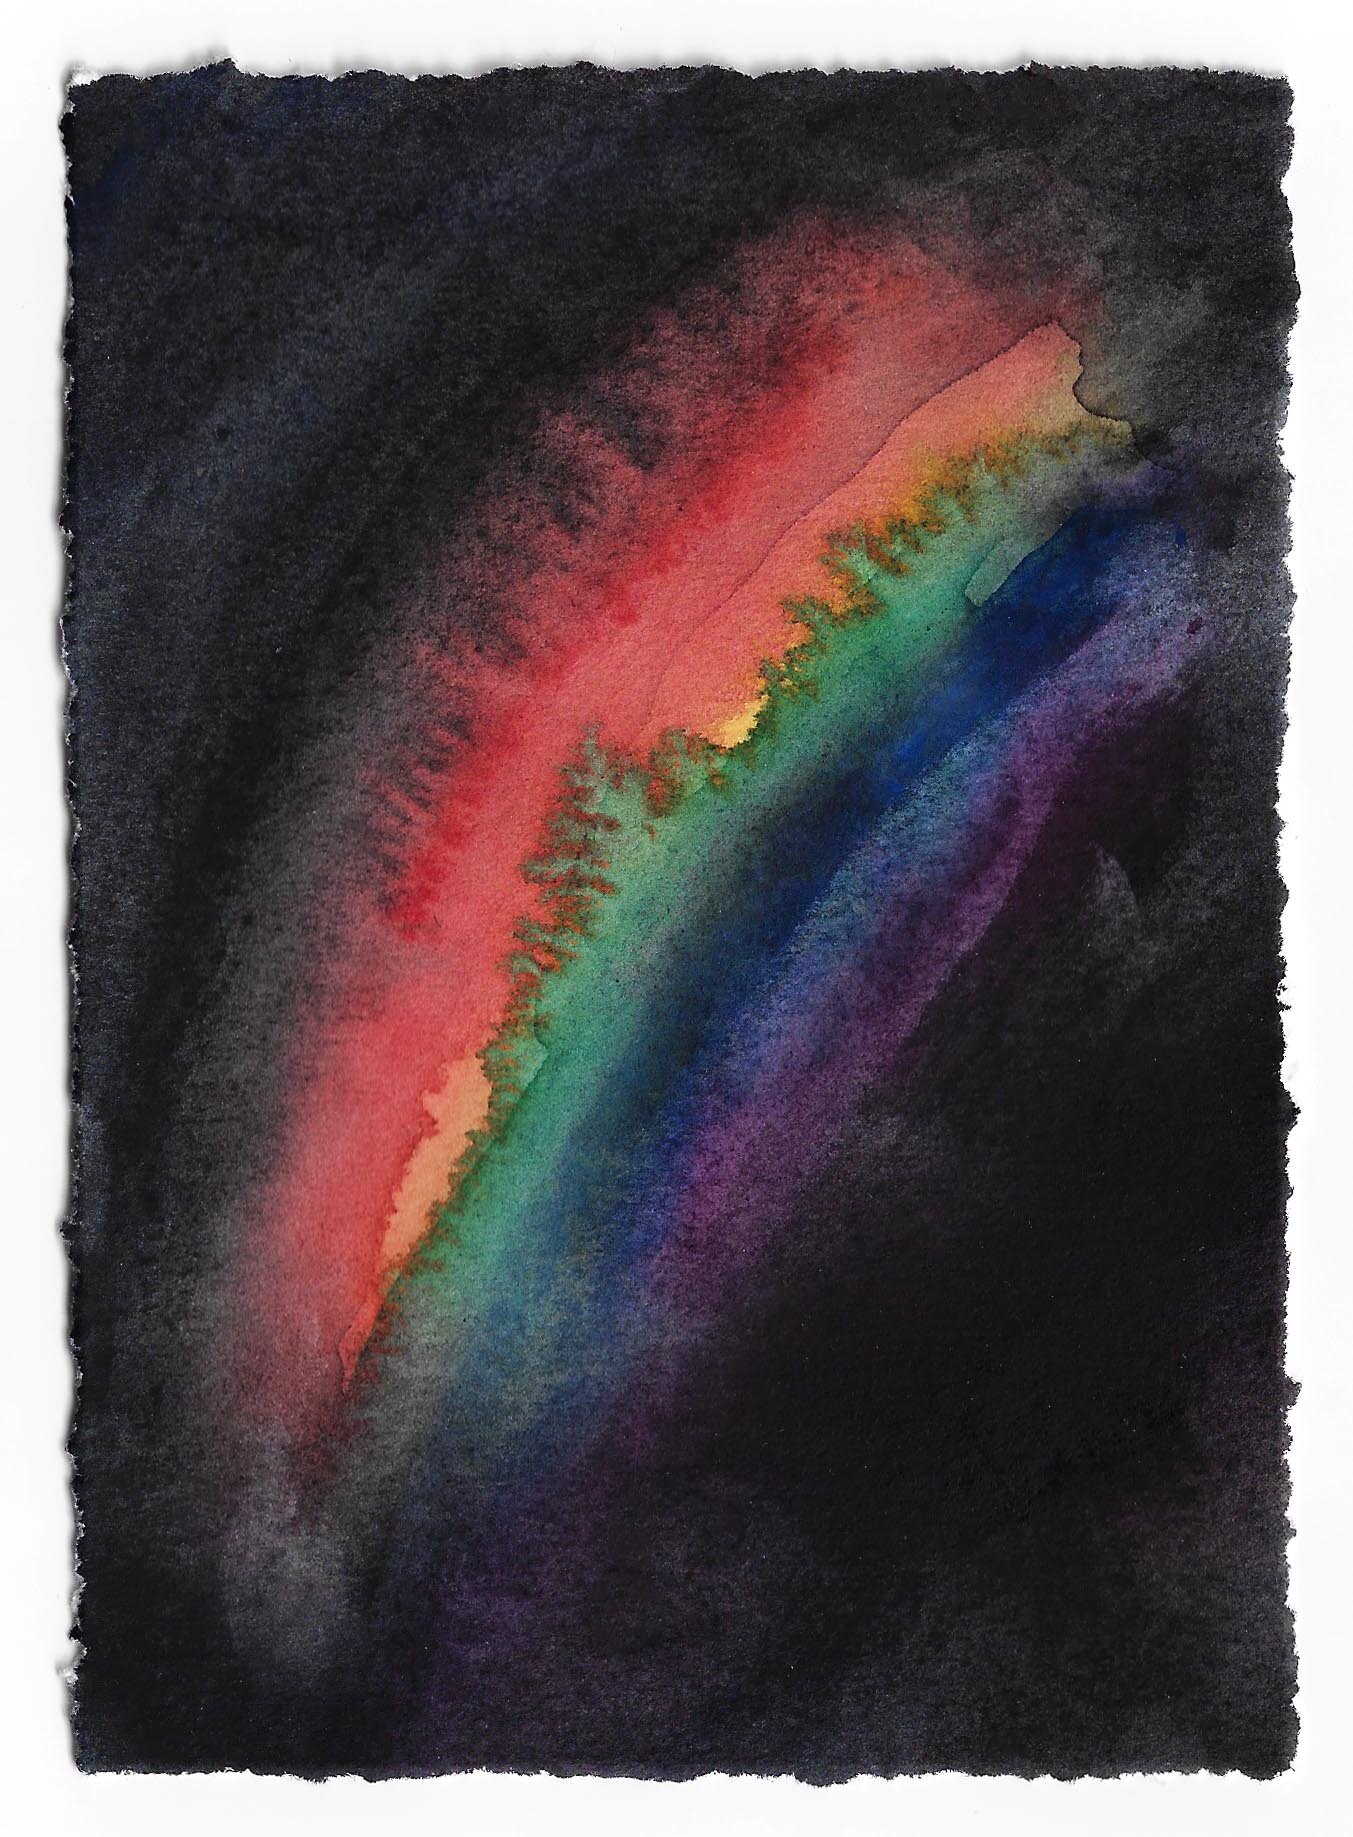 Painting a Rainbow With a Dirty Brush